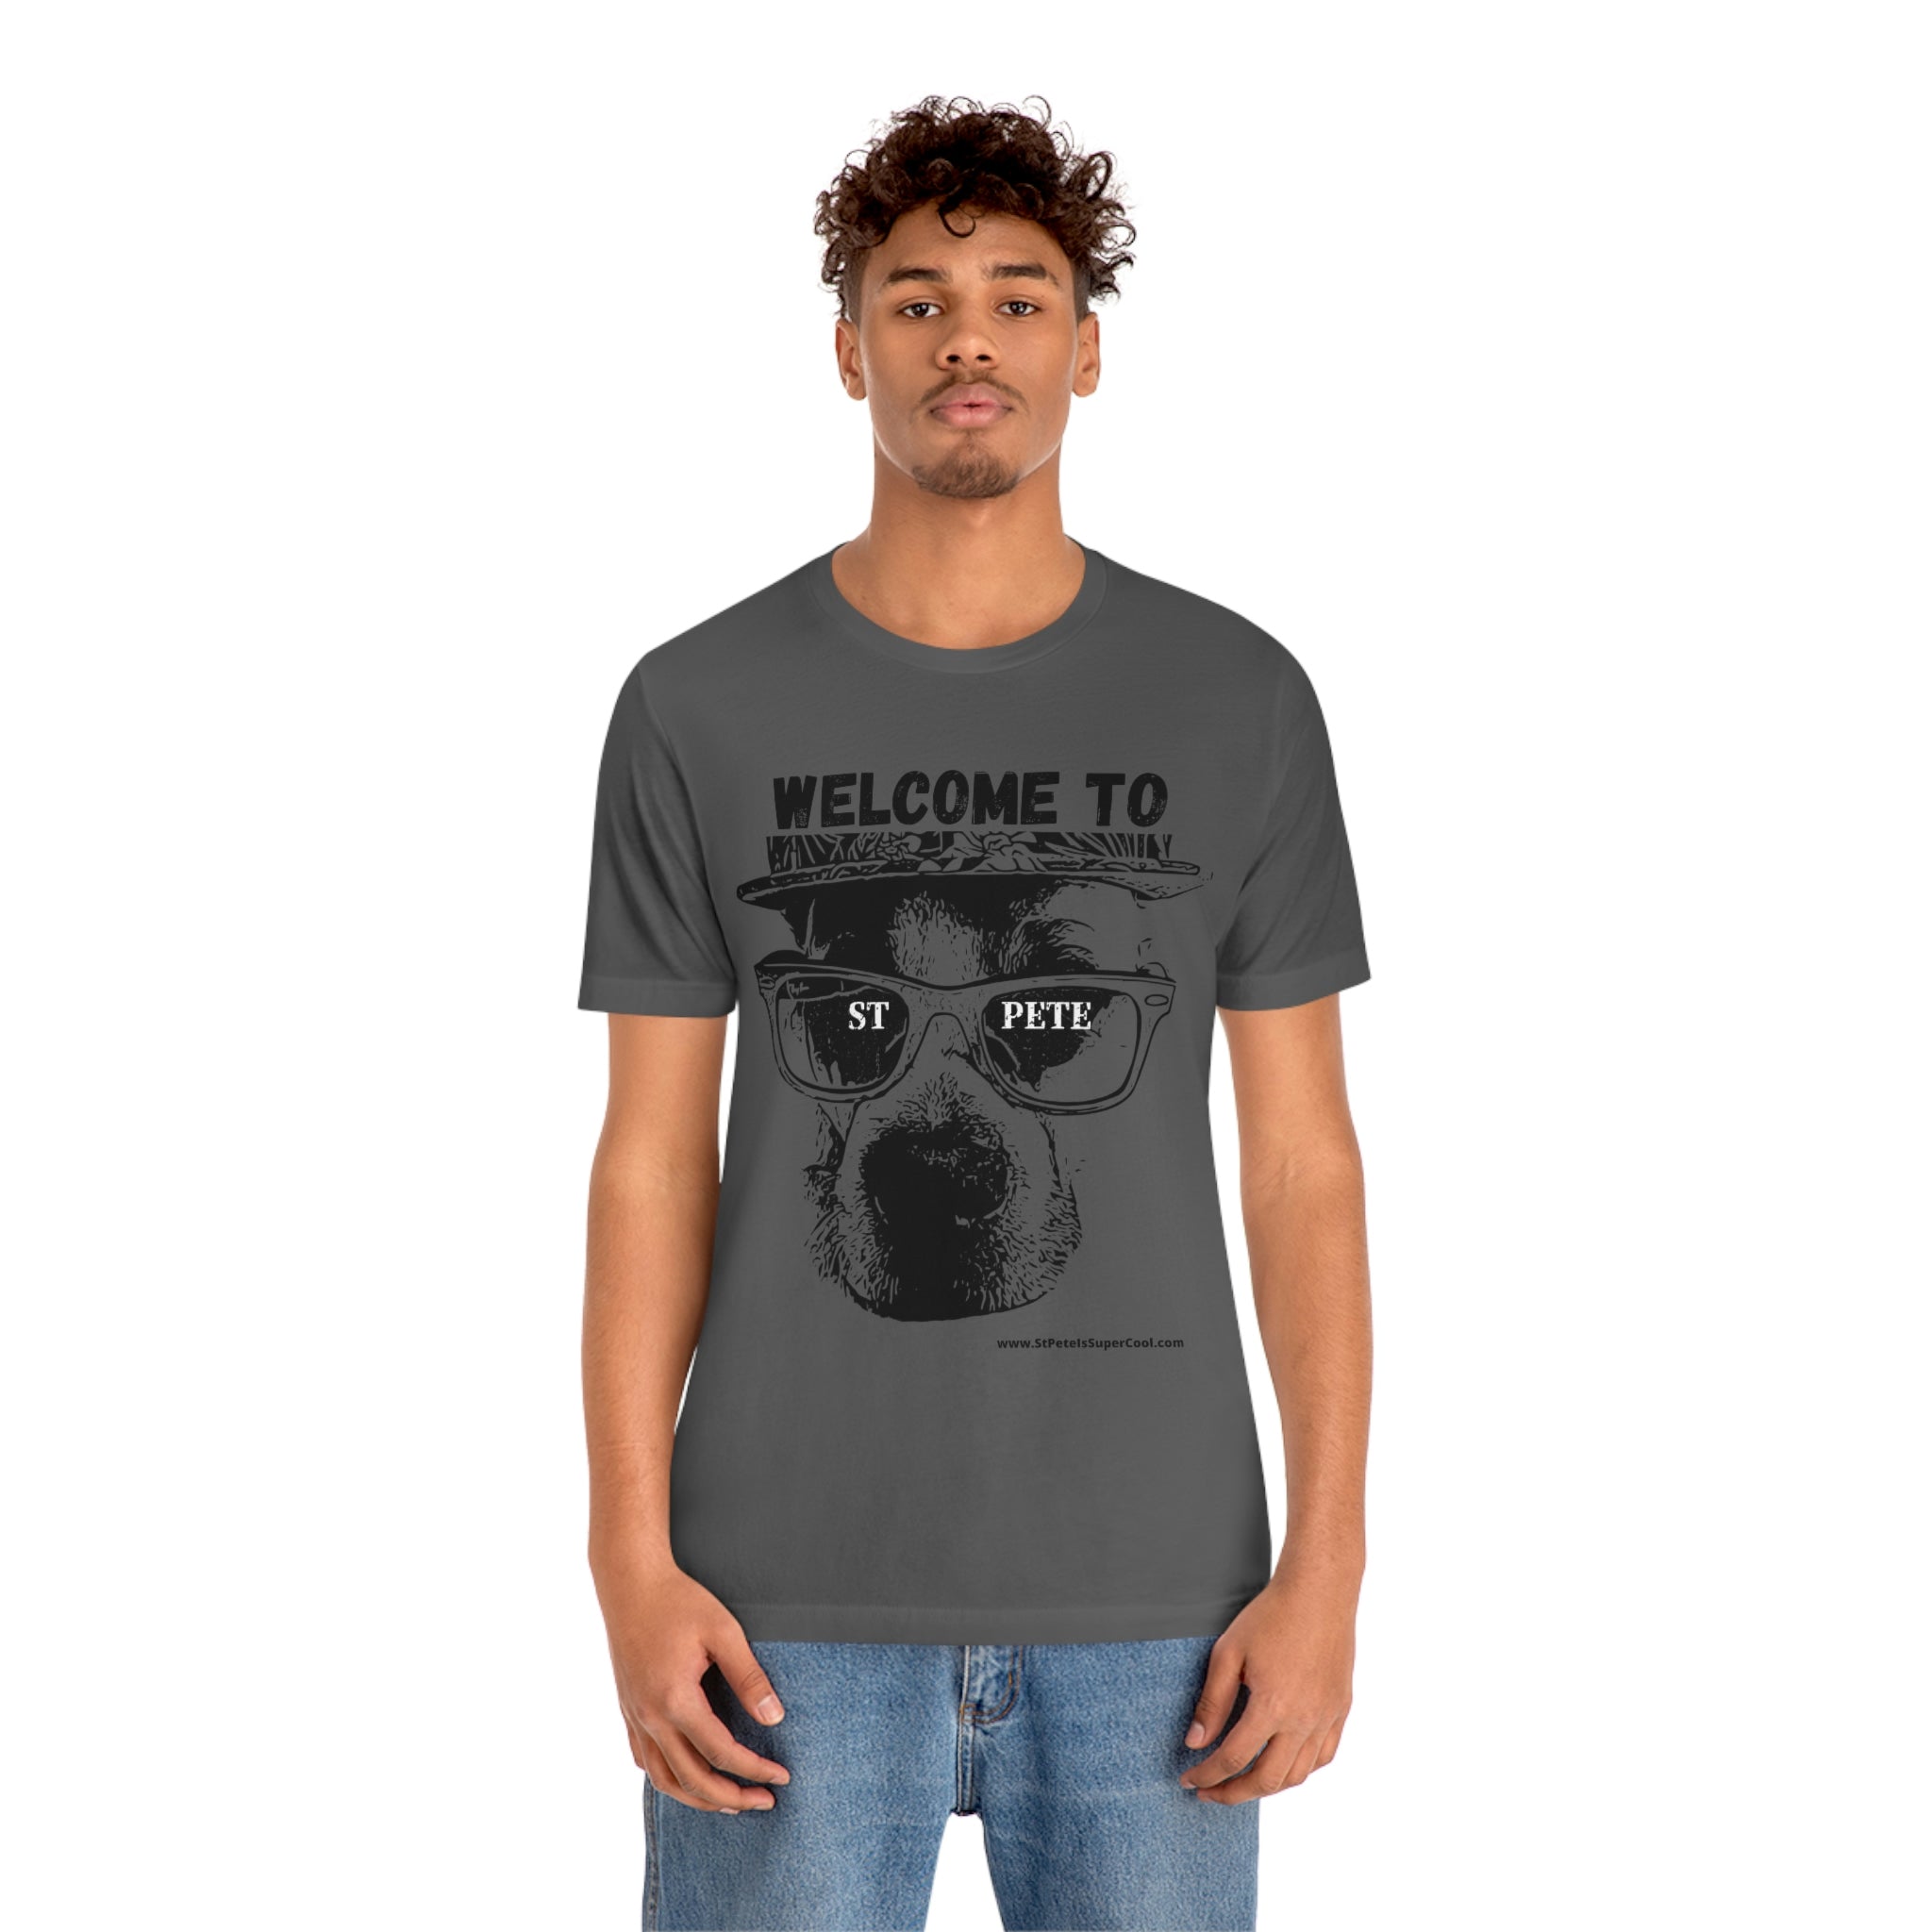 "Welcome to St Pete" T-shirt